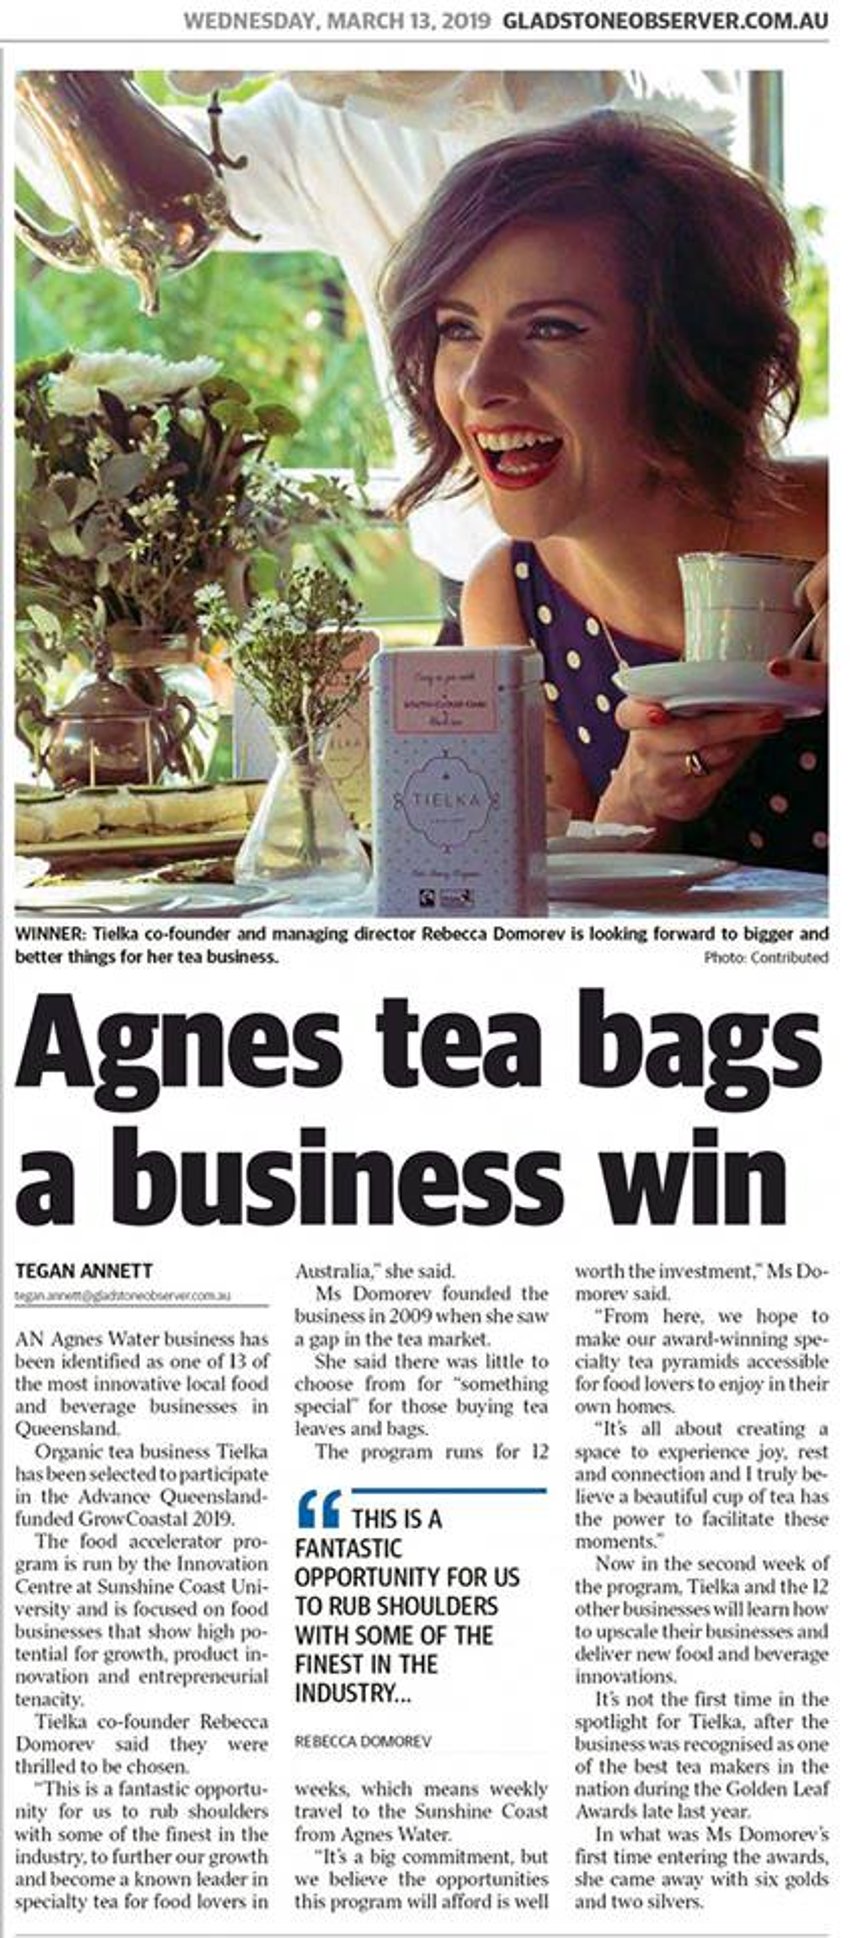 on-becoming-australia-s-first-fairtrade-oganic-loose-leaf-tea-collection